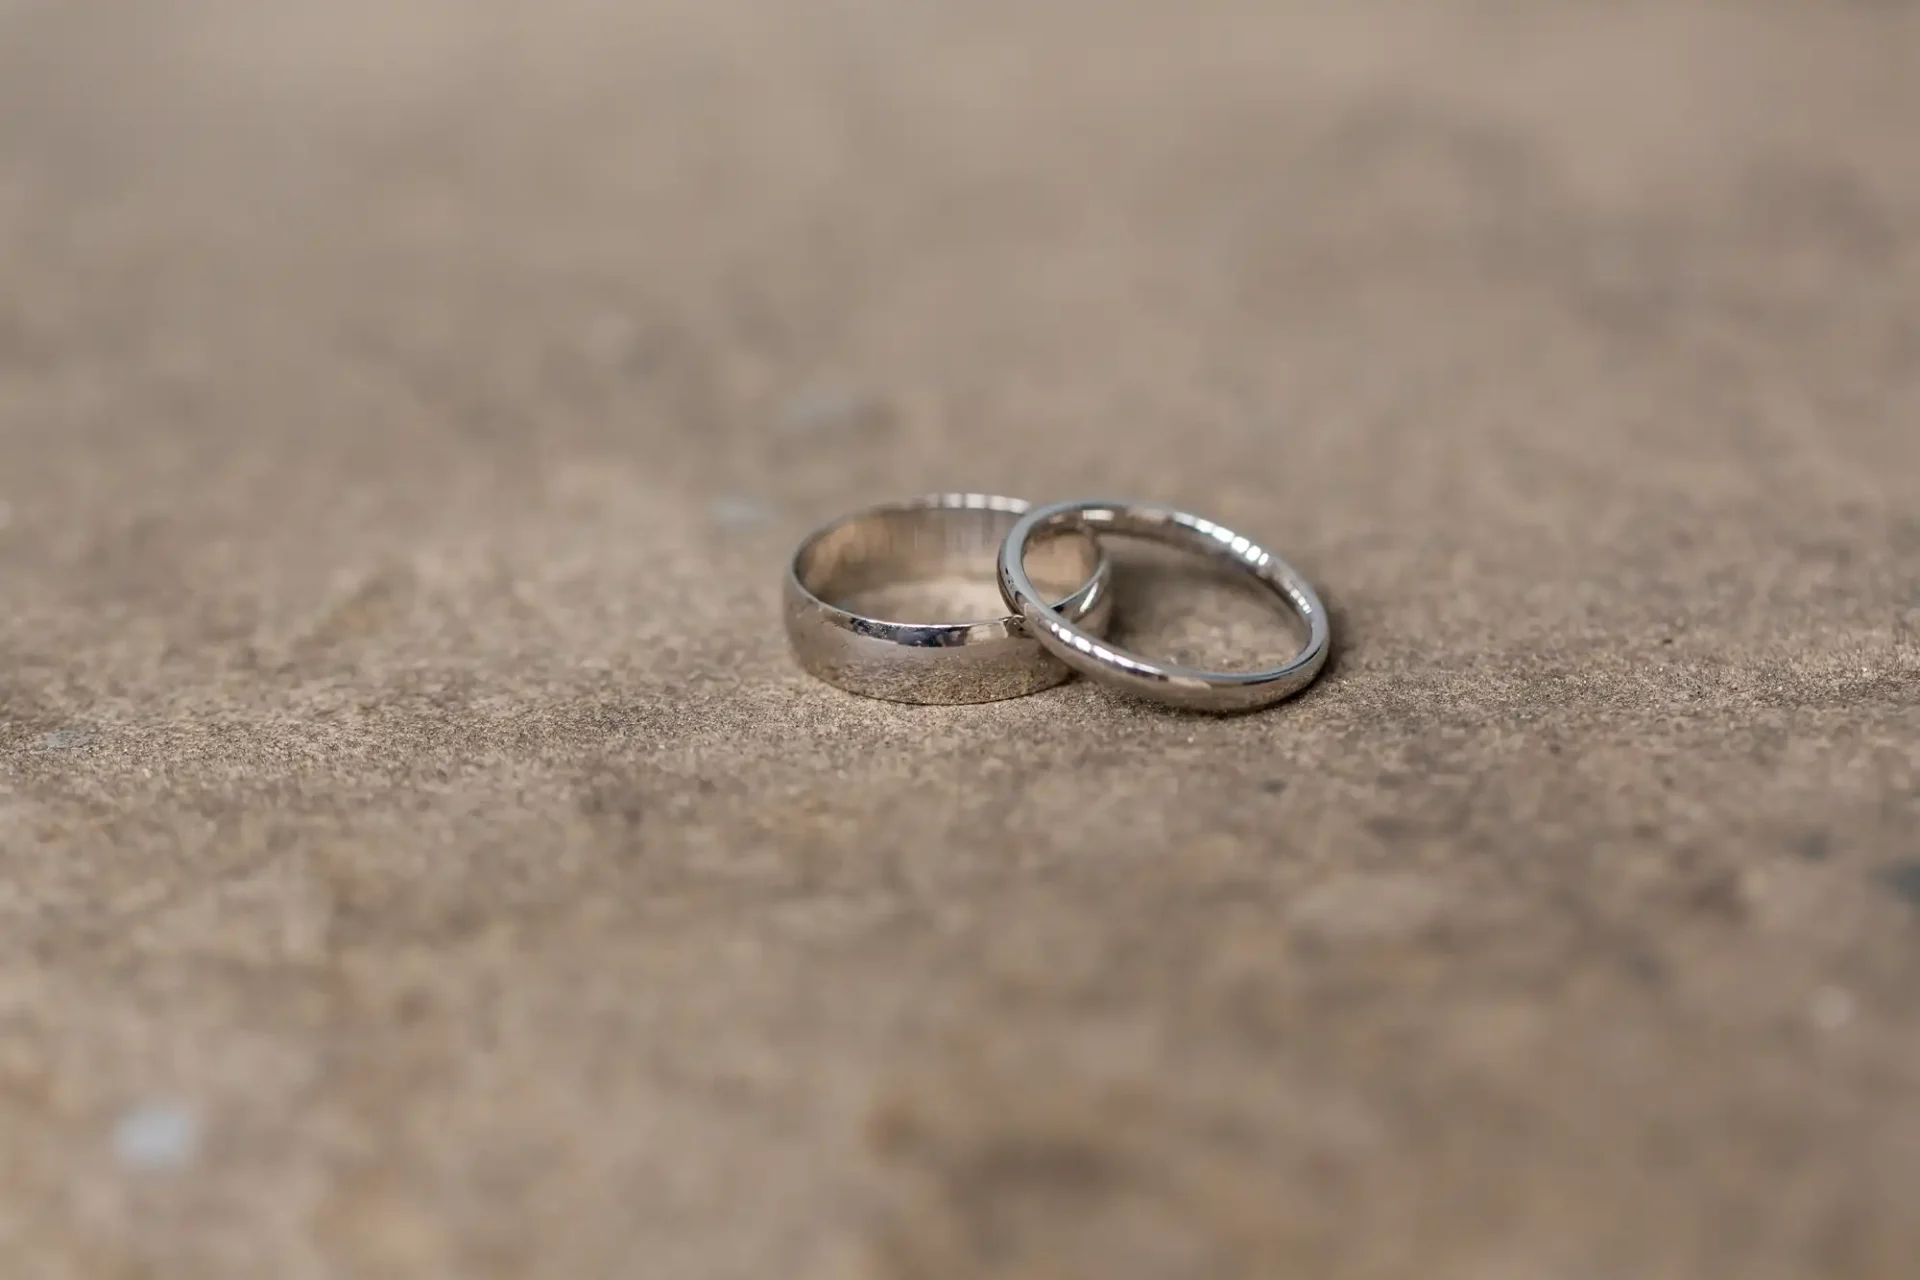 Two wedding rings lie on a textured surface, one slightly in front of the other, with a soft-focus background.